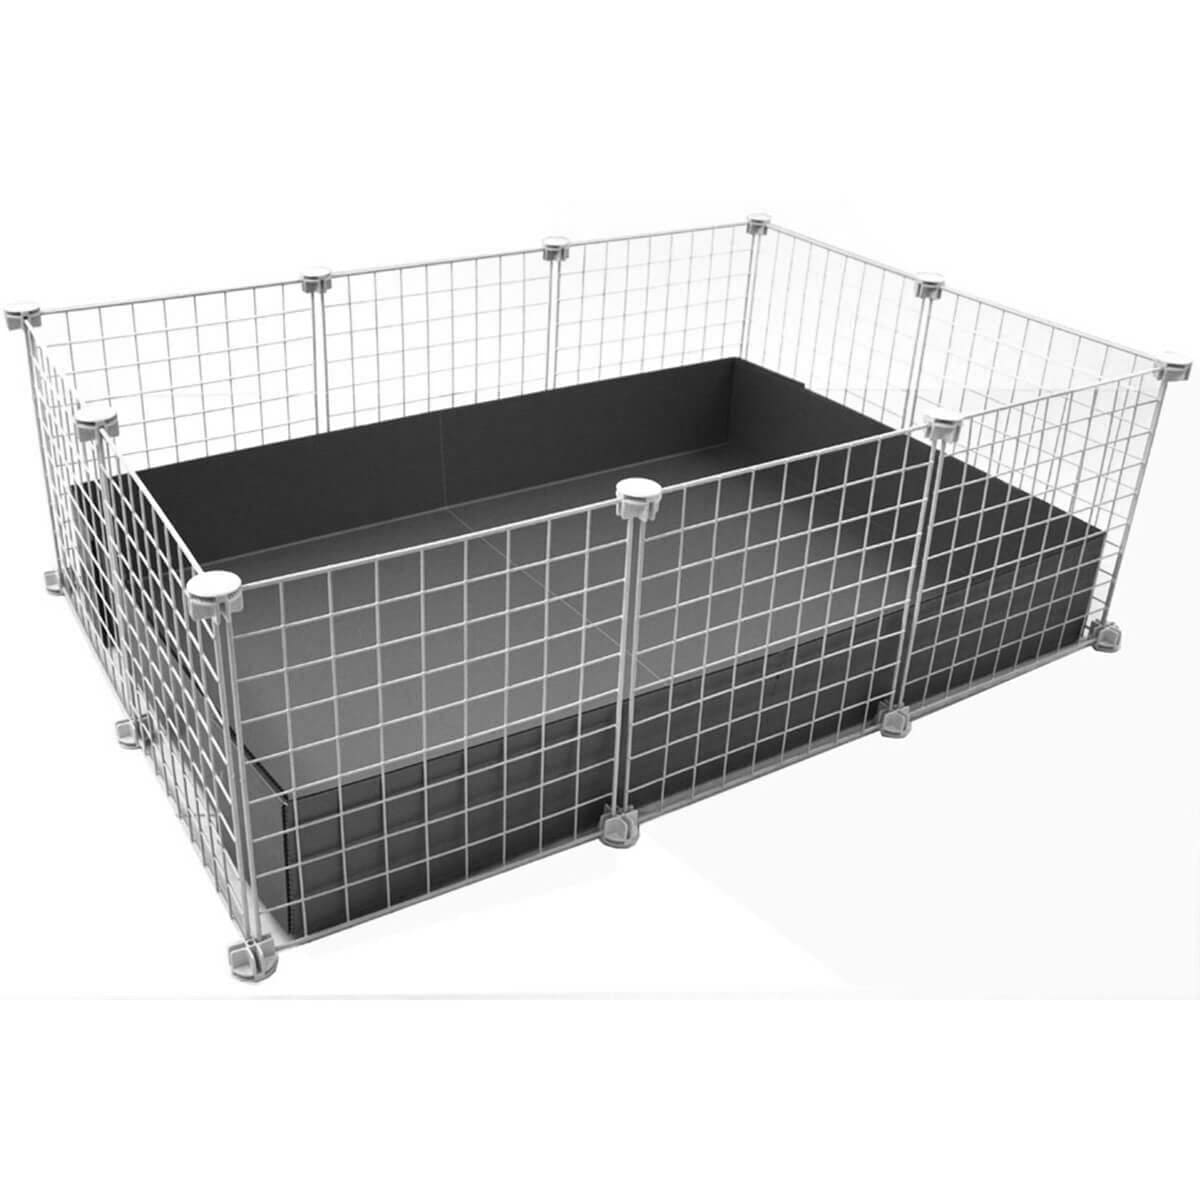 Small silver C&C guinea pig cage with white grids and connectors